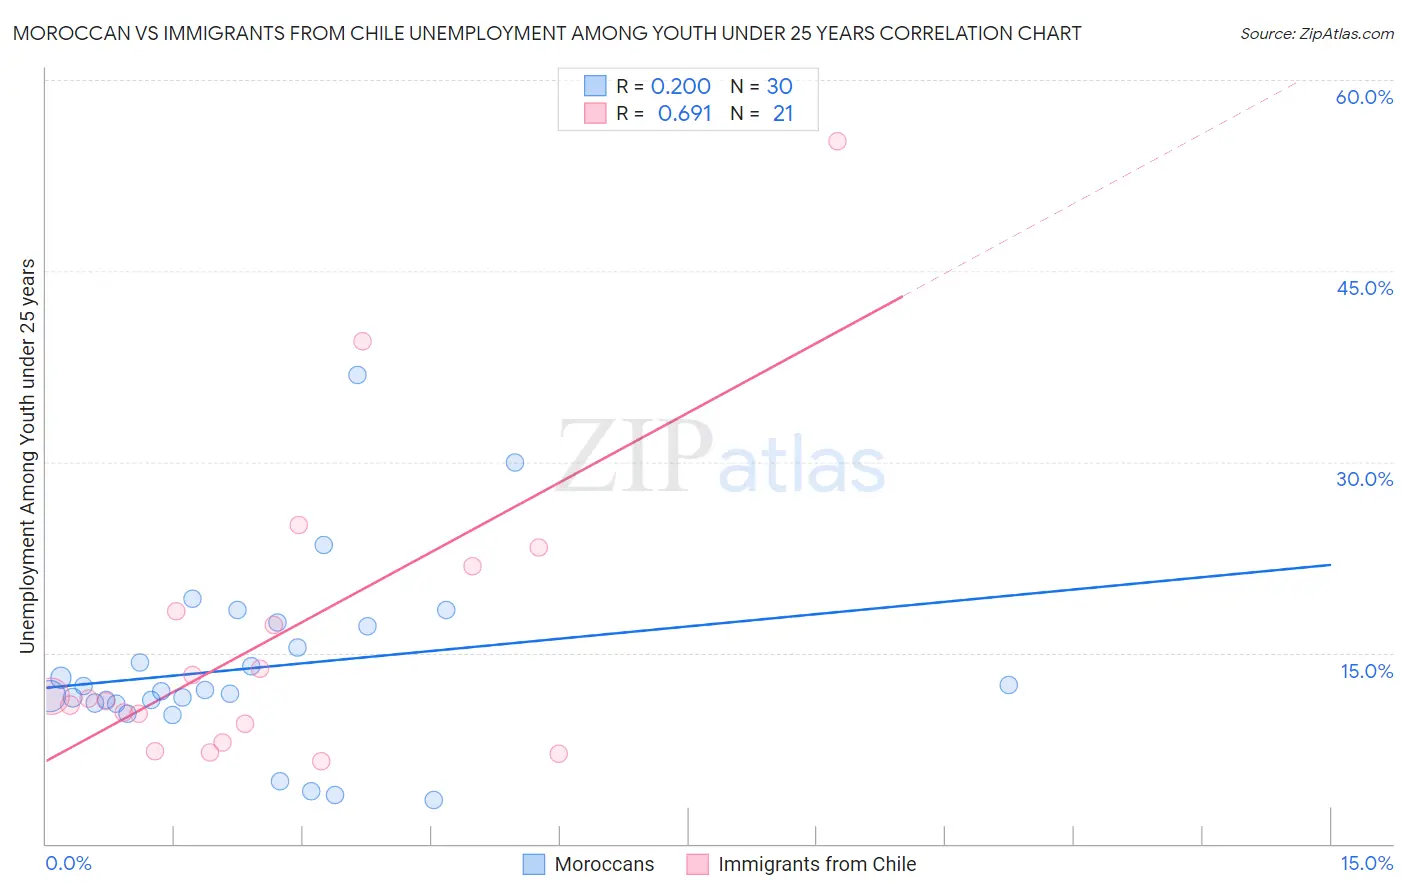 Moroccan vs Immigrants from Chile Unemployment Among Youth under 25 years